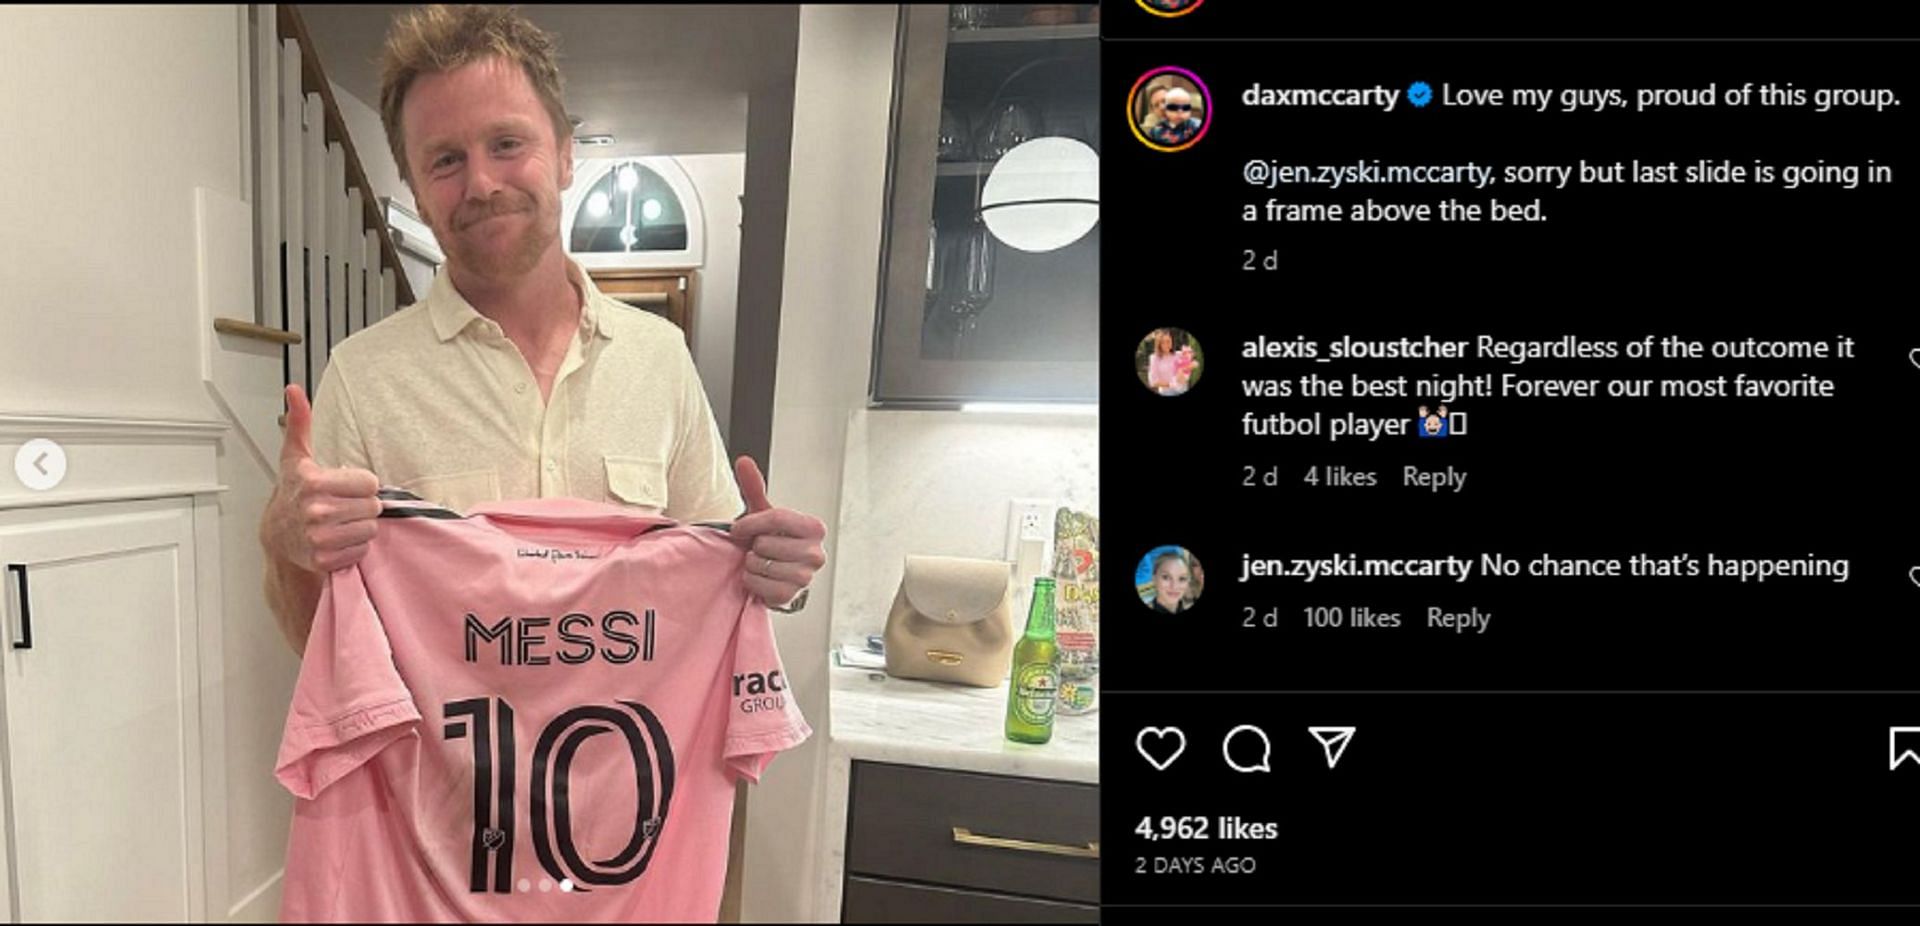 Lionel Messi&#039;s jersey could be in Dax McCarthy&#039;s bedroom.